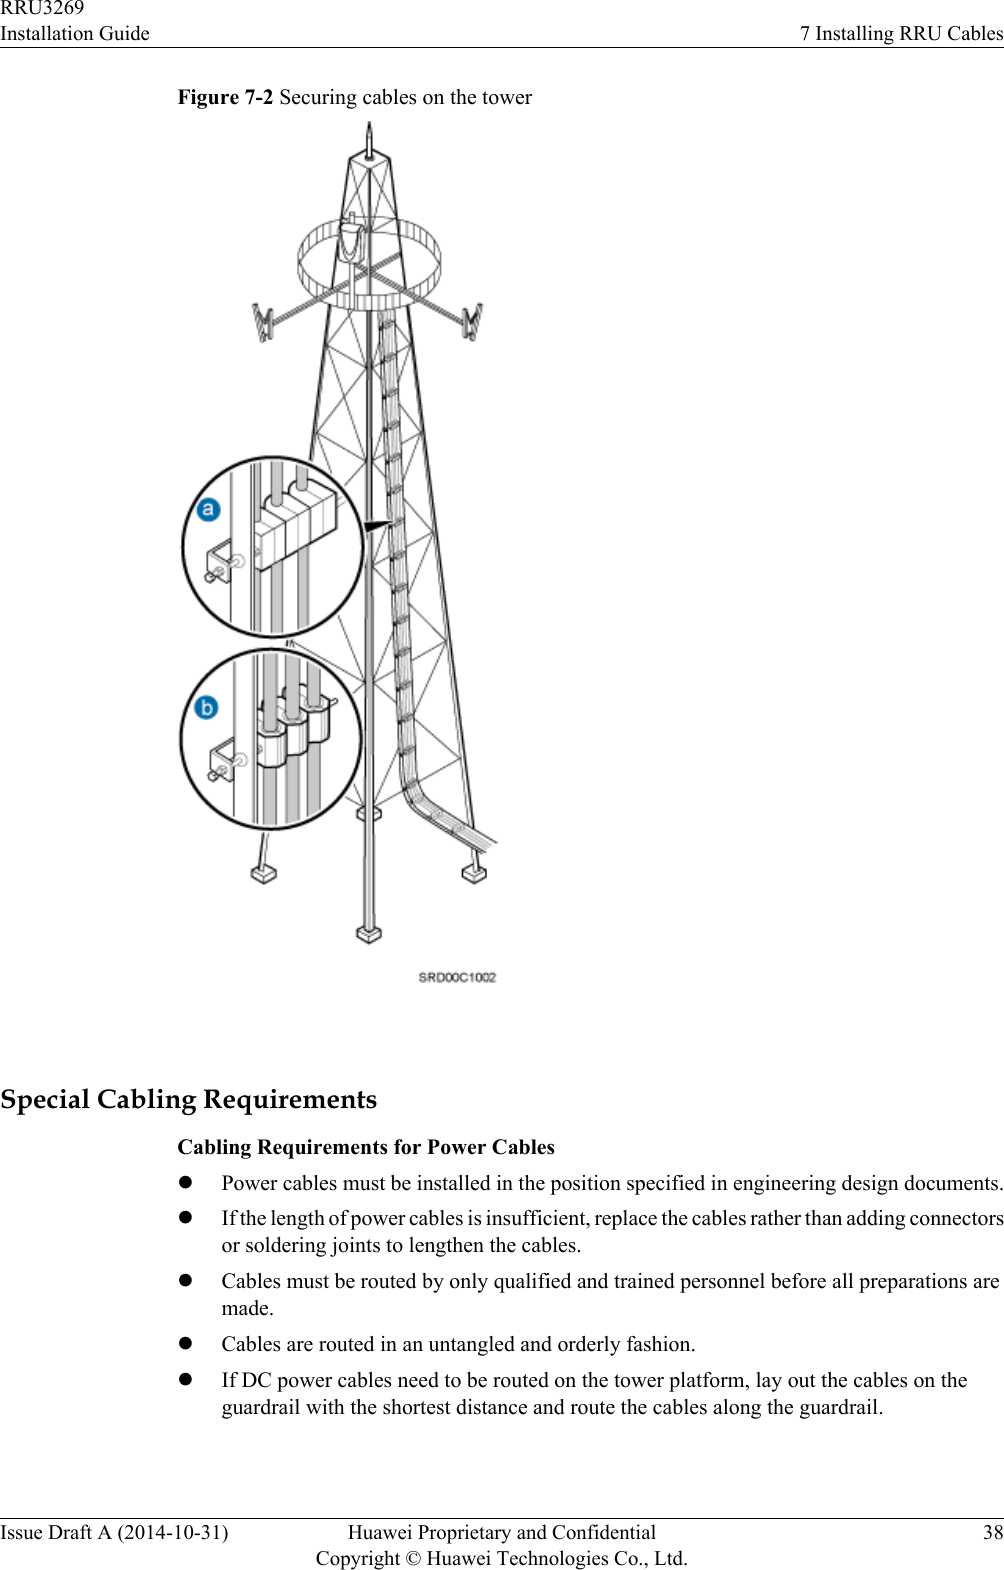 Figure 7-2 Securing cables on the tower Special Cabling RequirementsCabling Requirements for Power CableslPower cables must be installed in the position specified in engineering design documents.lIf the length of power cables is insufficient, replace the cables rather than adding connectorsor soldering joints to lengthen the cables.lCables must be routed by only qualified and trained personnel before all preparations aremade.lCables are routed in an untangled and orderly fashion.lIf DC power cables need to be routed on the tower platform, lay out the cables on theguardrail with the shortest distance and route the cables along the guardrail.RRU3269Installation Guide 7 Installing RRU CablesIssue Draft A (2014-10-31) Huawei Proprietary and ConfidentialCopyright © Huawei Technologies Co., Ltd.38